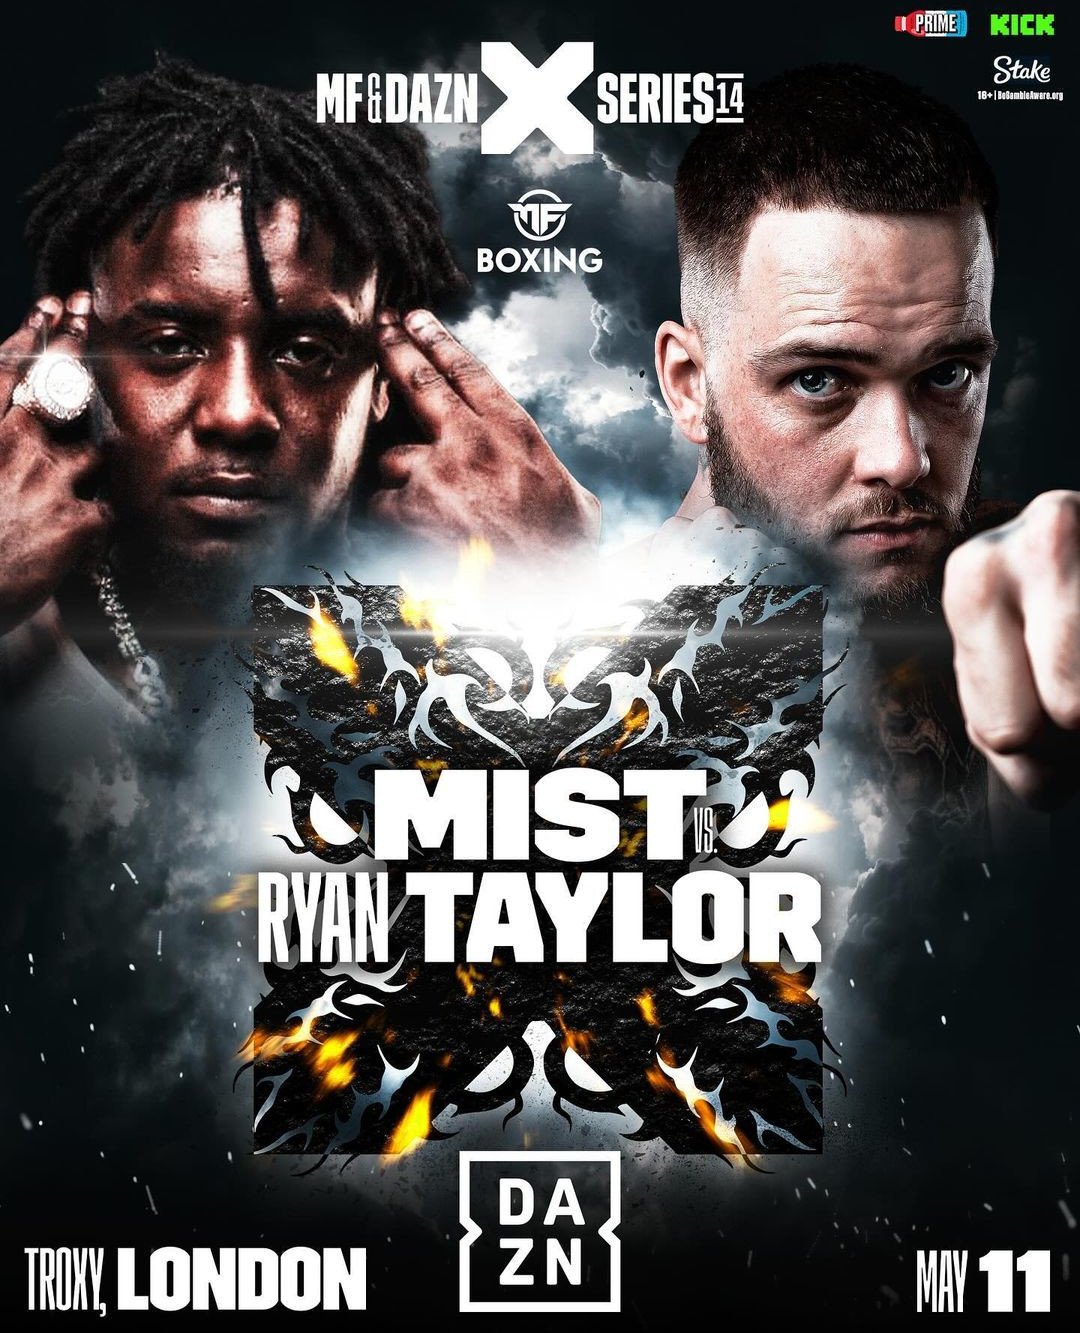 Just a couple more days until MIST faces Ryan Taylor in the ring 🥊
 
MIST gon' get that win easy 🎯👊
 
@mist_rs @ryan_taylor @misfitsboxing @daznboxing